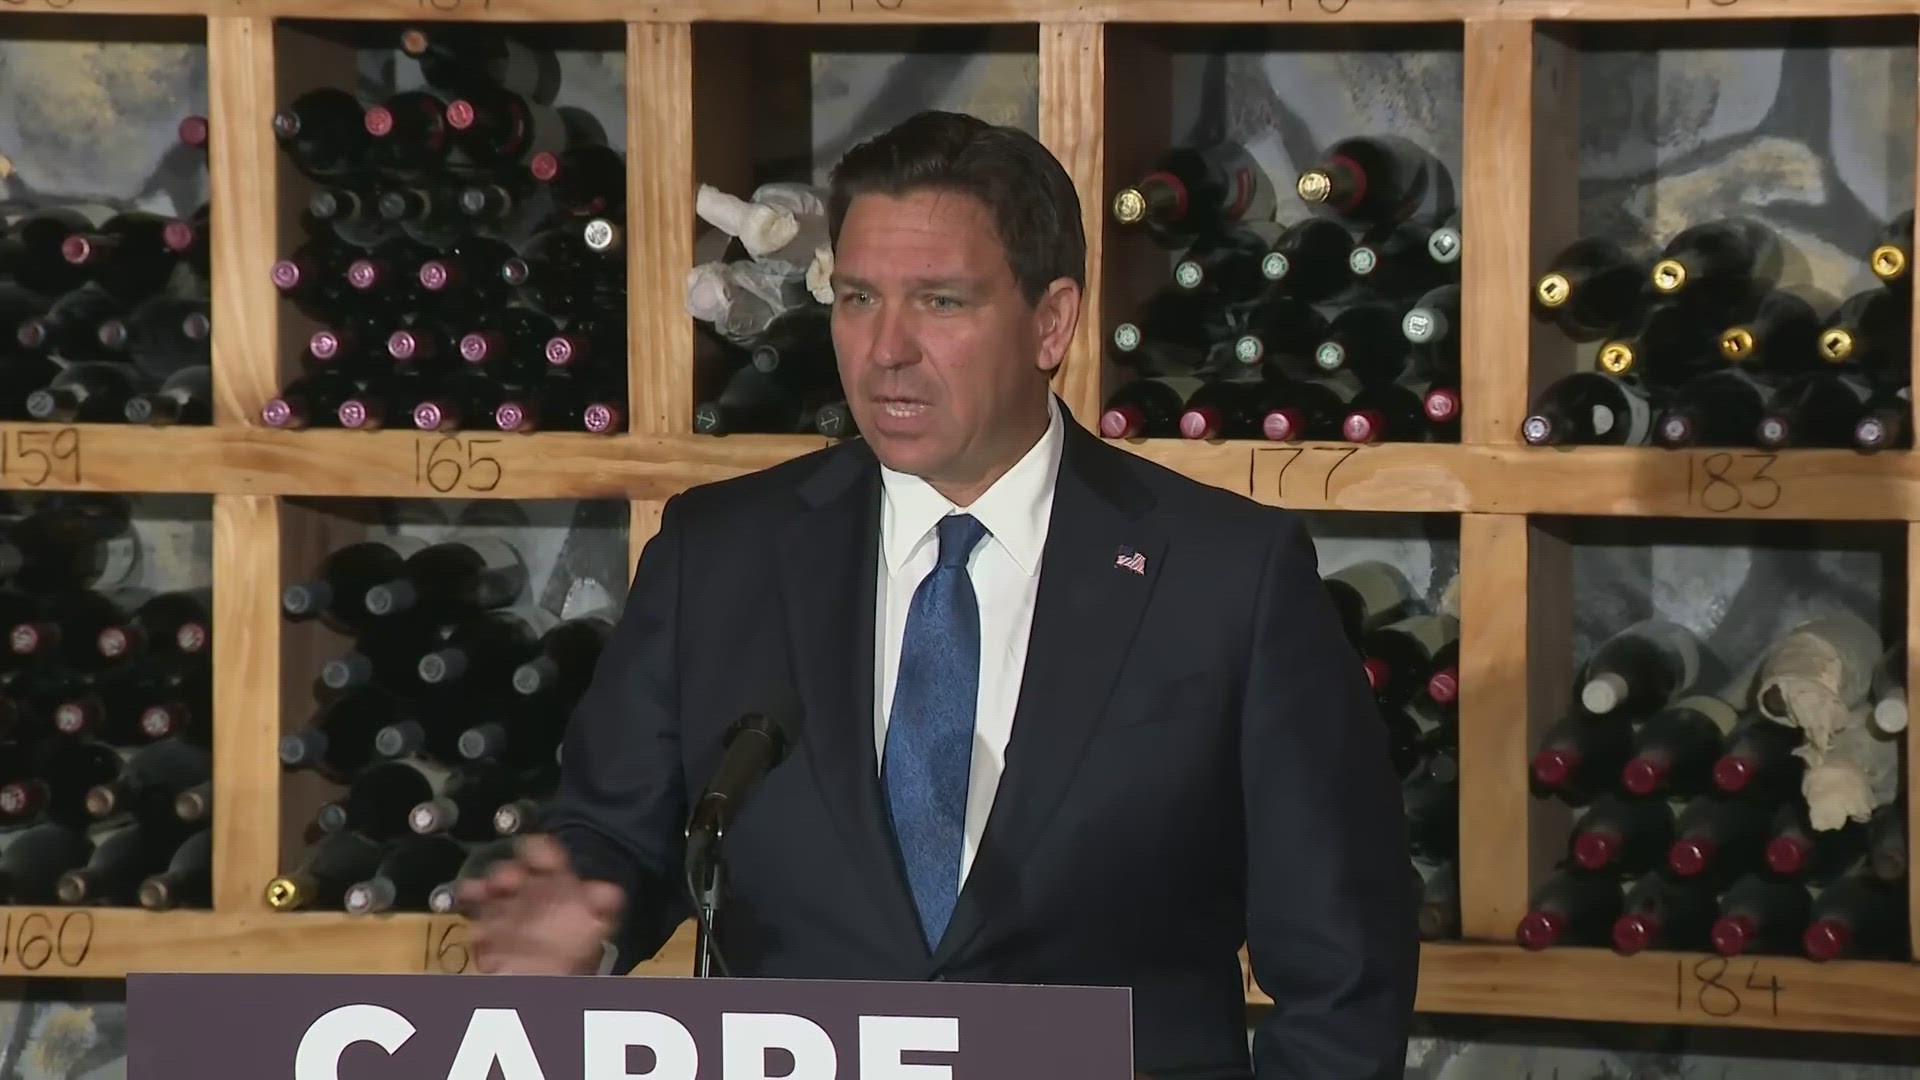 Gov. Ron DeSantis signed a bill allowing restaurants and retailers to sell larger wine bottles. He signed the legislation at Wine Watch in Fort Lauderdale.